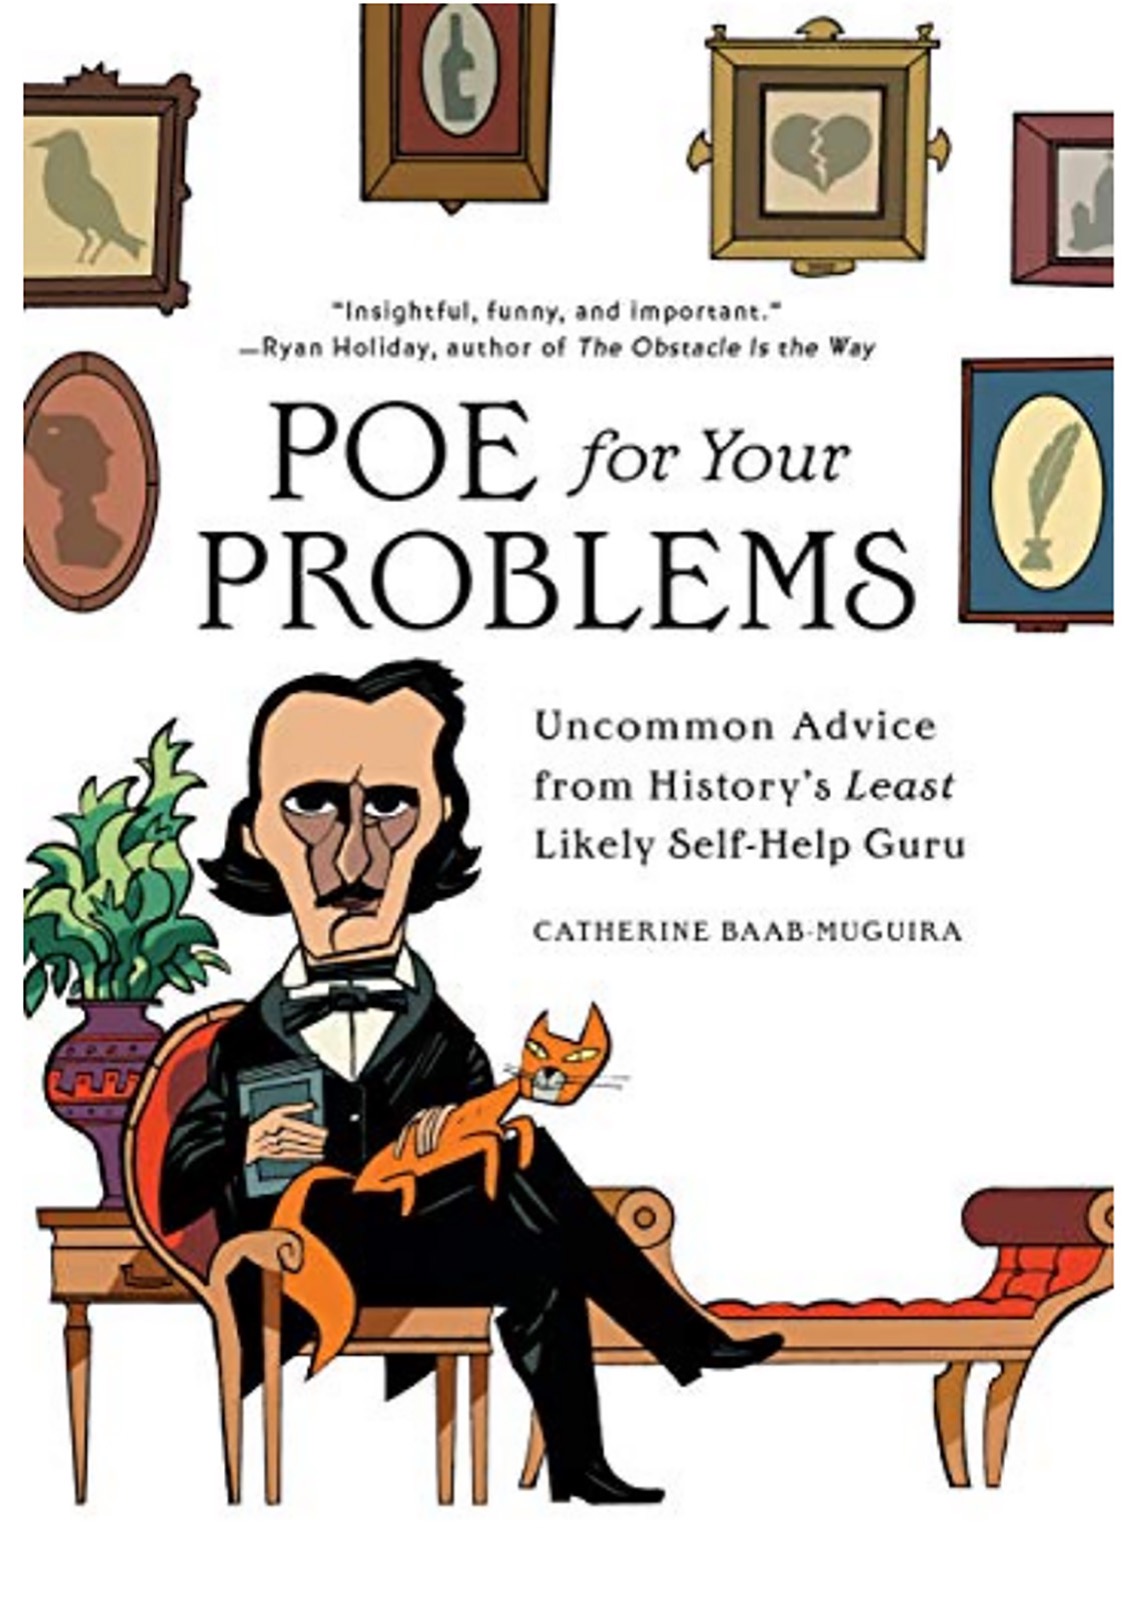 POE FOR YOUR PROBLEMS: UNCOMMON ADVICE FROM HISTORY'S LEAST LIKELY SELF-HELP GURU